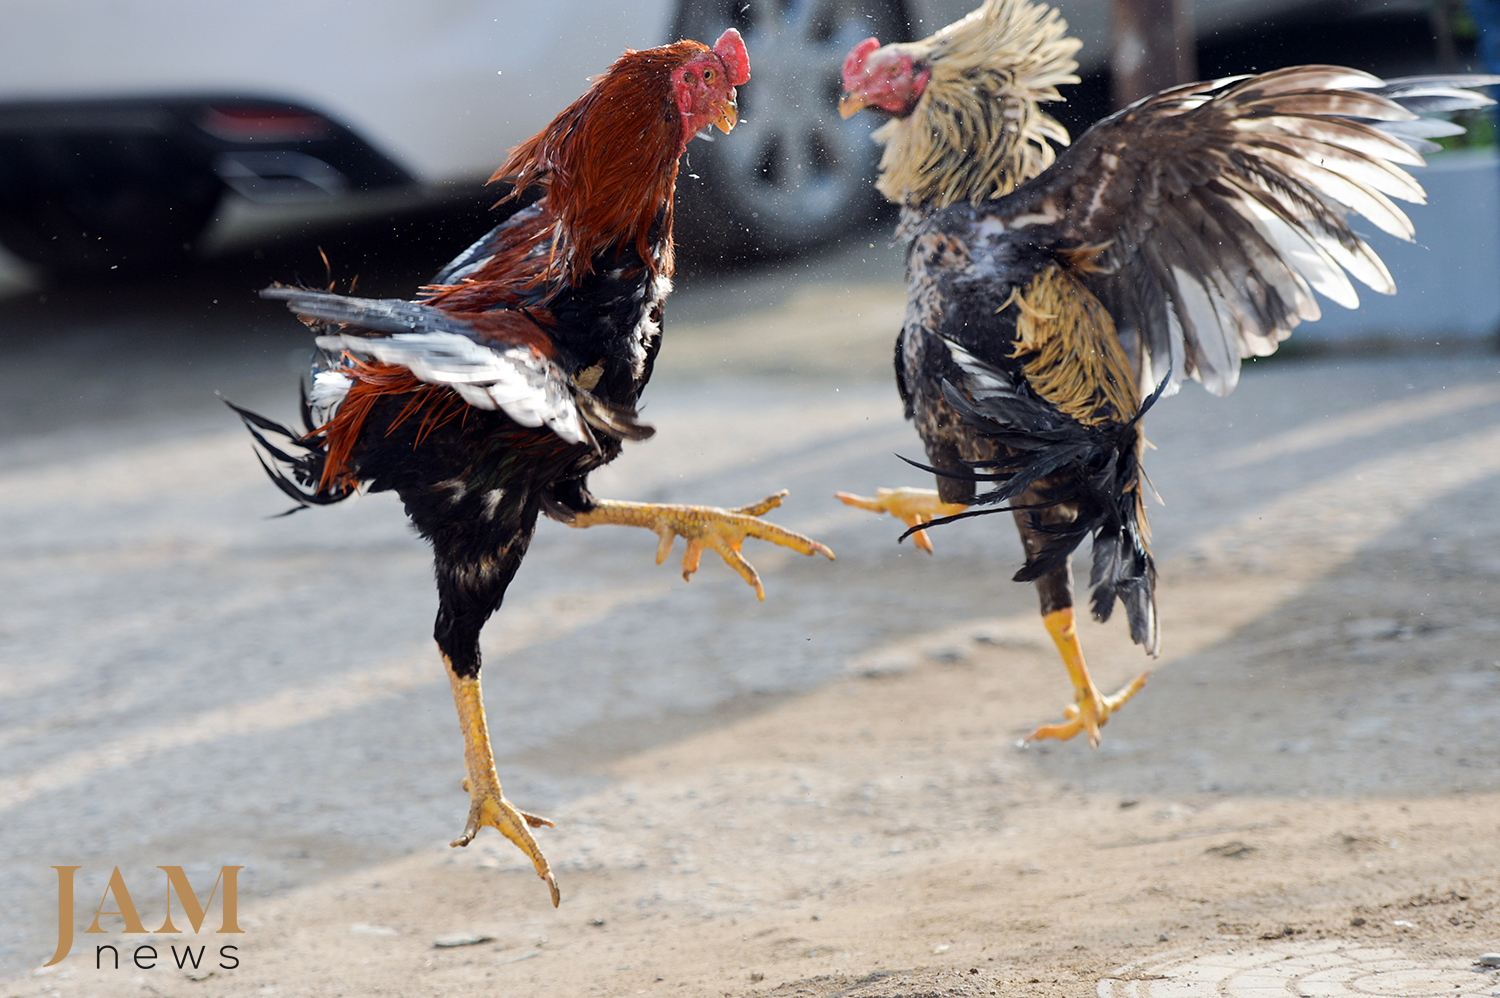 A fight can last from 20 minutes to two hours. Photo JAMnews. Cockfighting in Azerbaijan